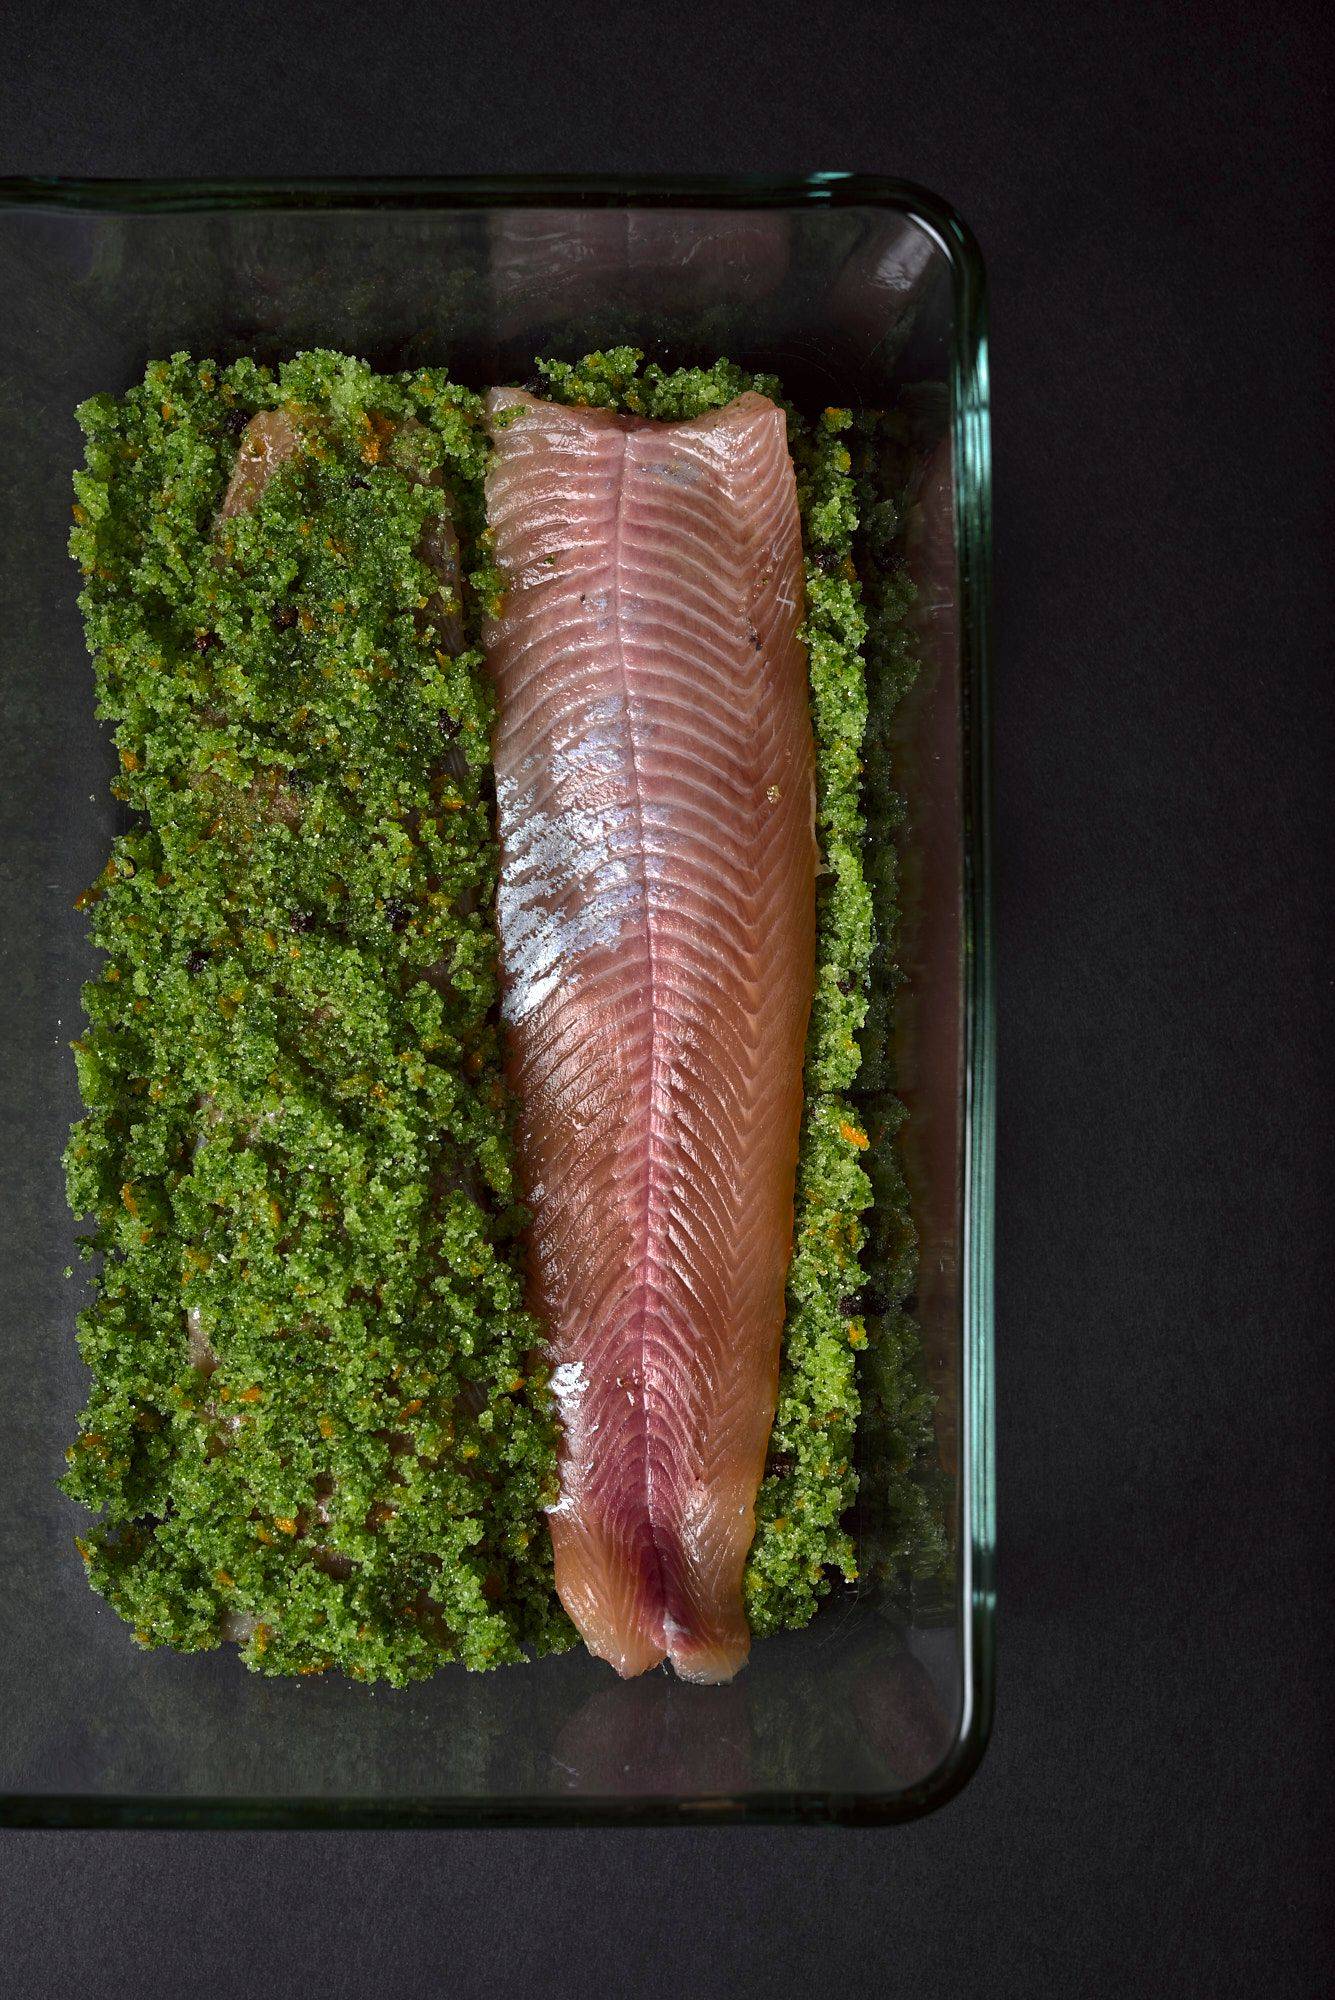 char fillets cured in basil and orange with black background